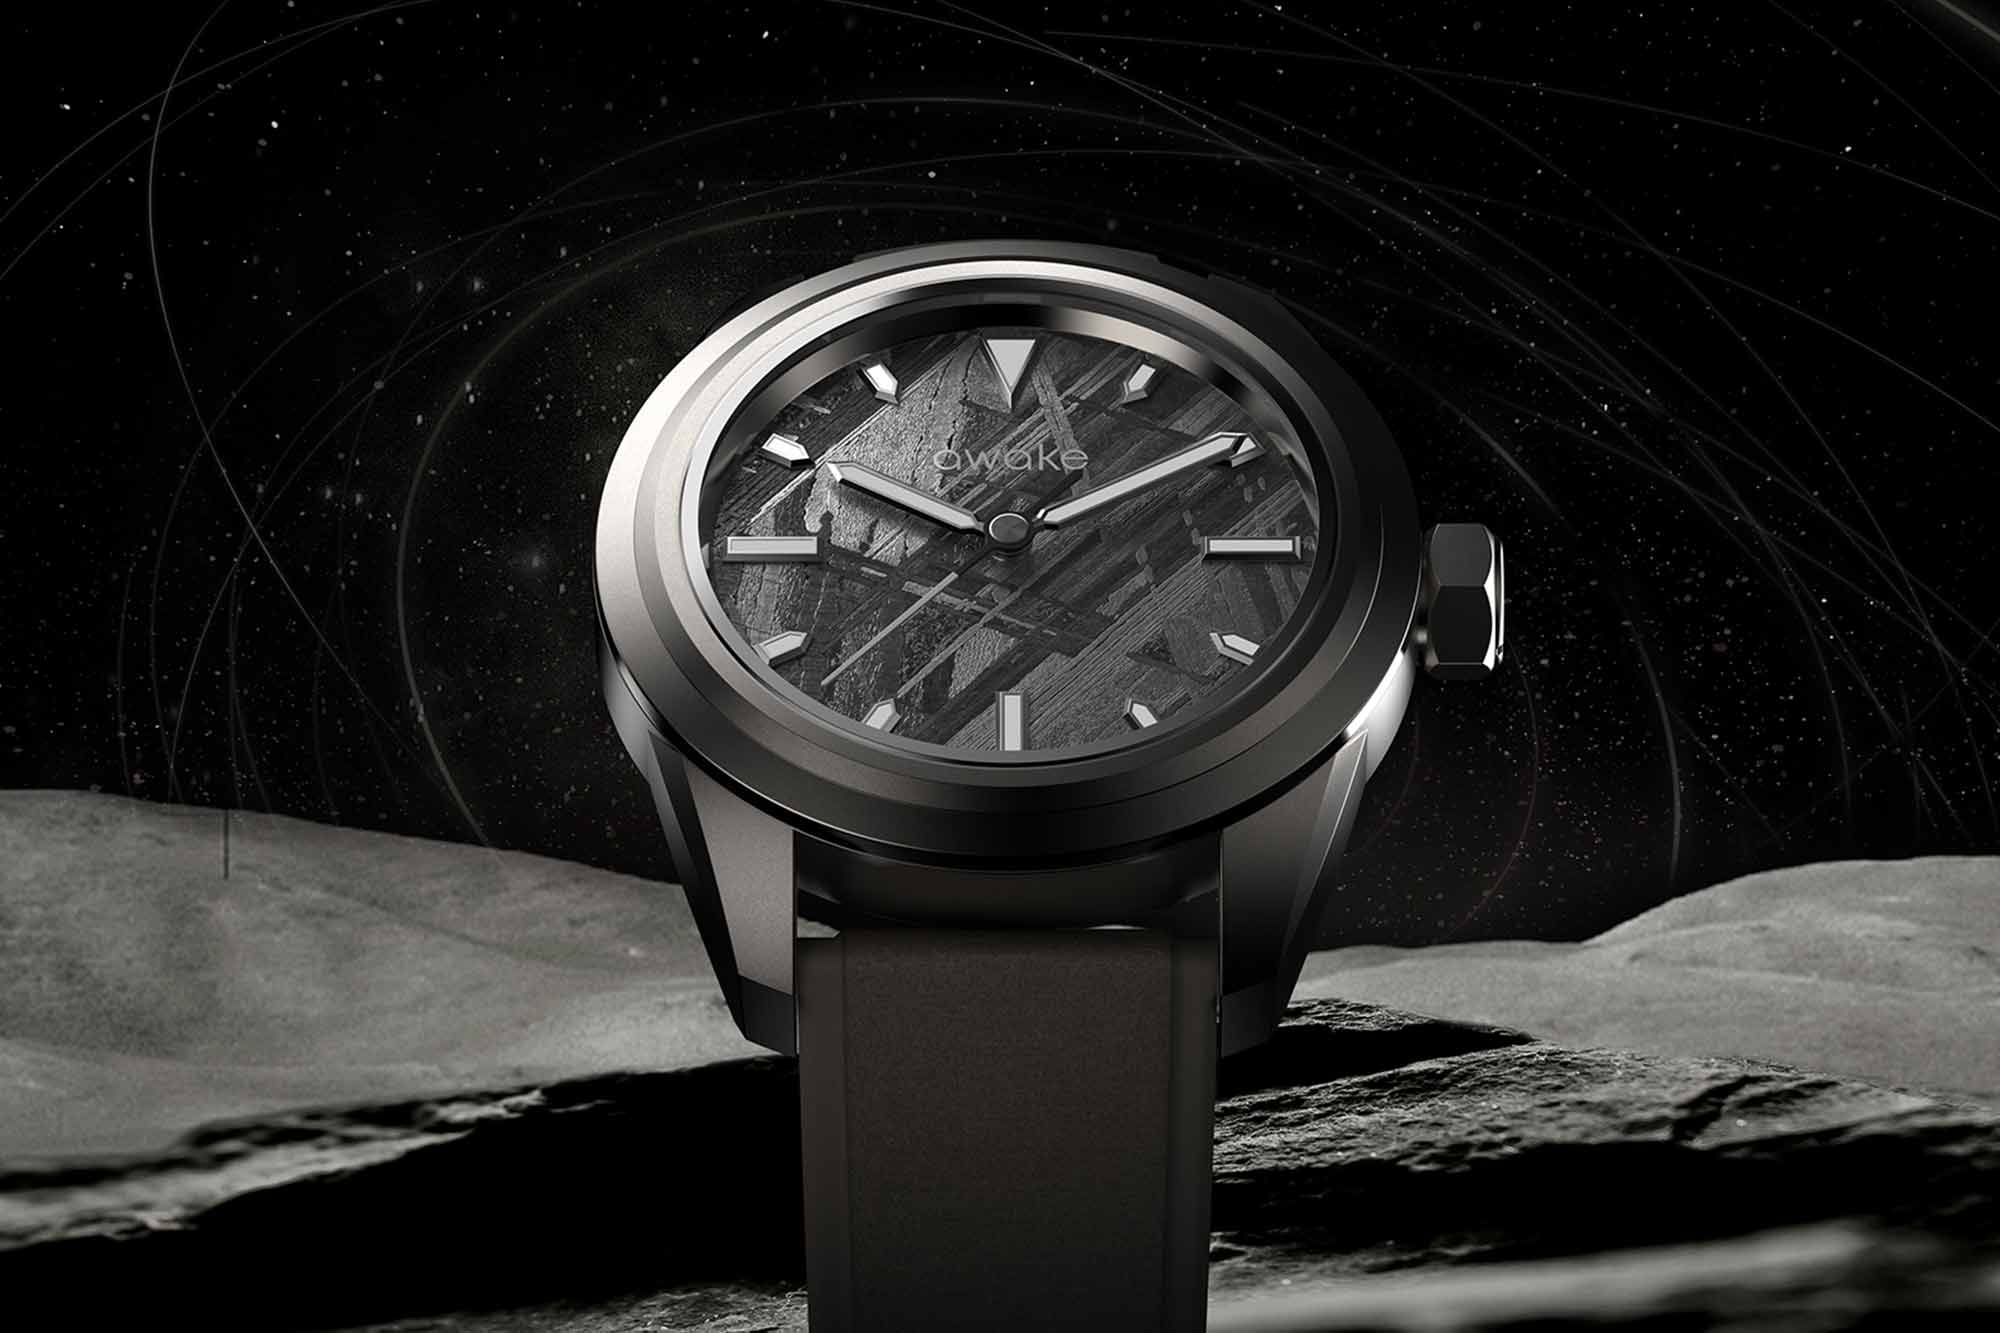 Awake Concepts Returns with a New Pair of Limited Editions Sporting Meteorite Dials